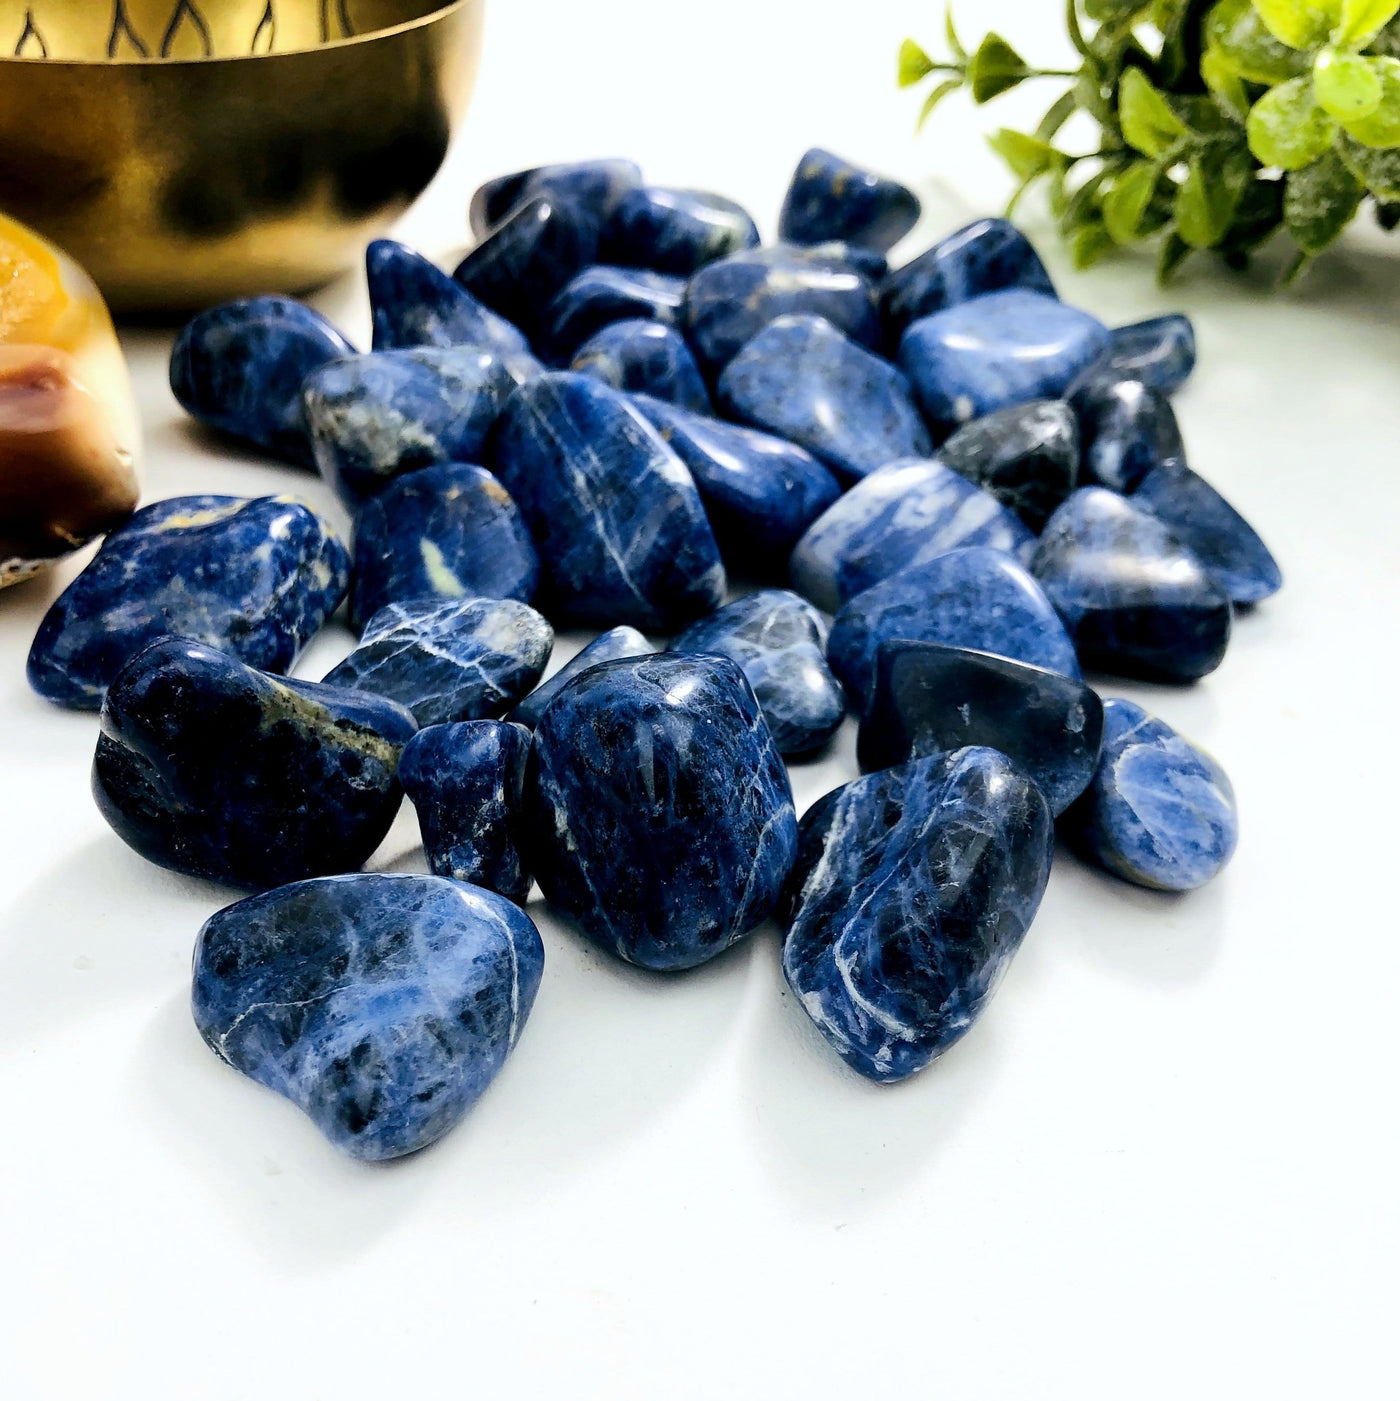 Close up view of 1 lb Blue Sodalite Tumbled Gemstones